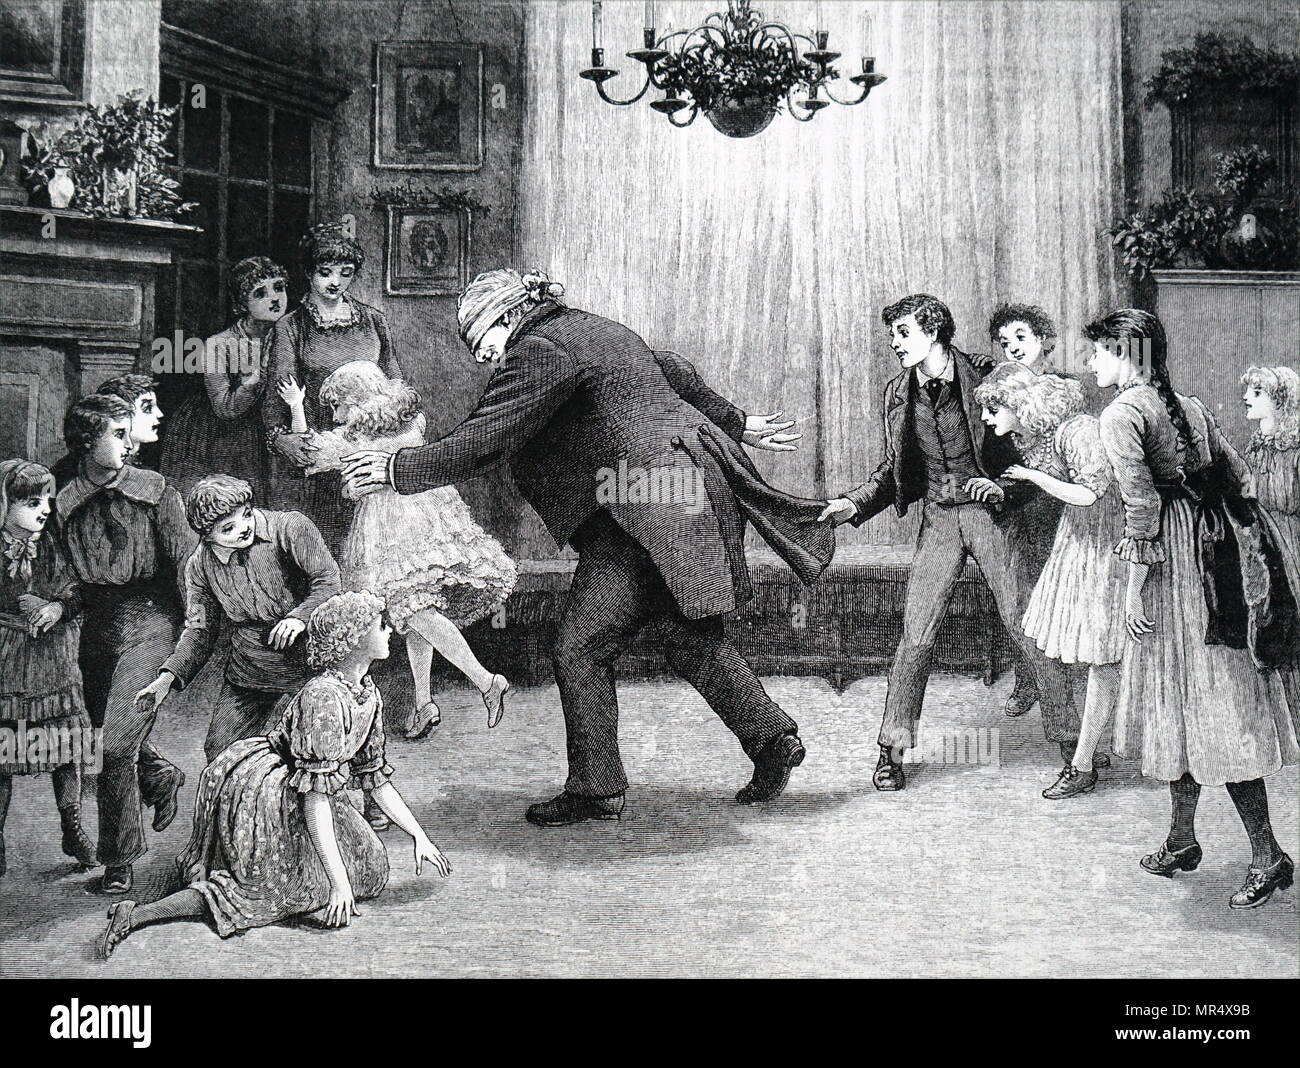 Illustration depicting an older family member playing Blind Man's Bluff, he is attempting to catch someone whilst he is blindfolded. Dated 19th century Stock Photo